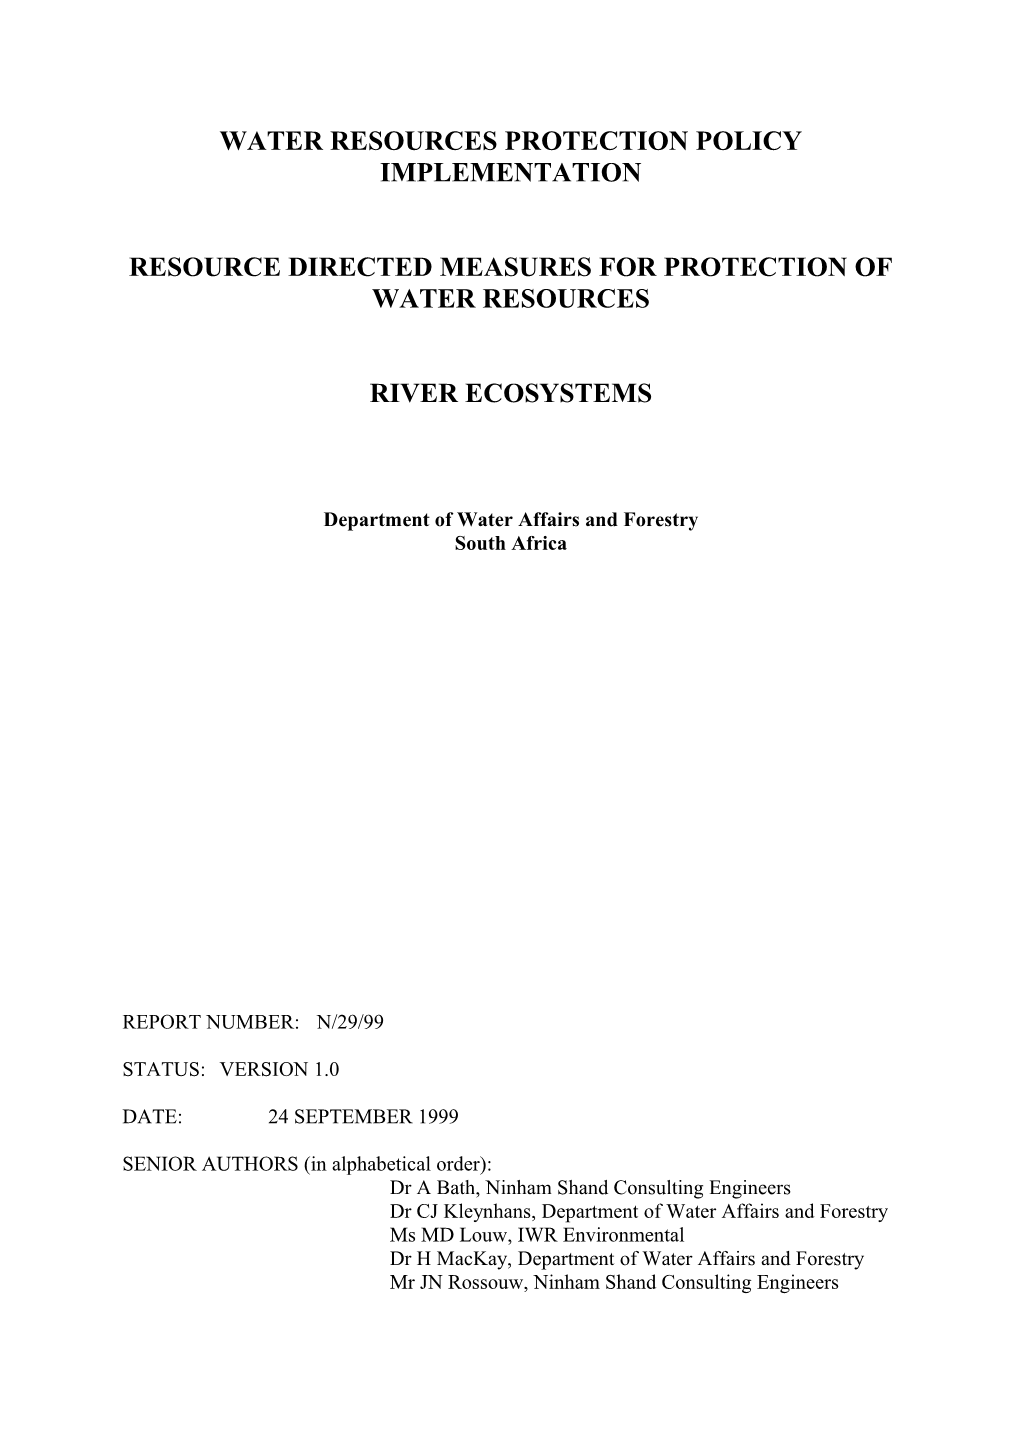 Water Resource Protection and Assessment Policy Implementation Process